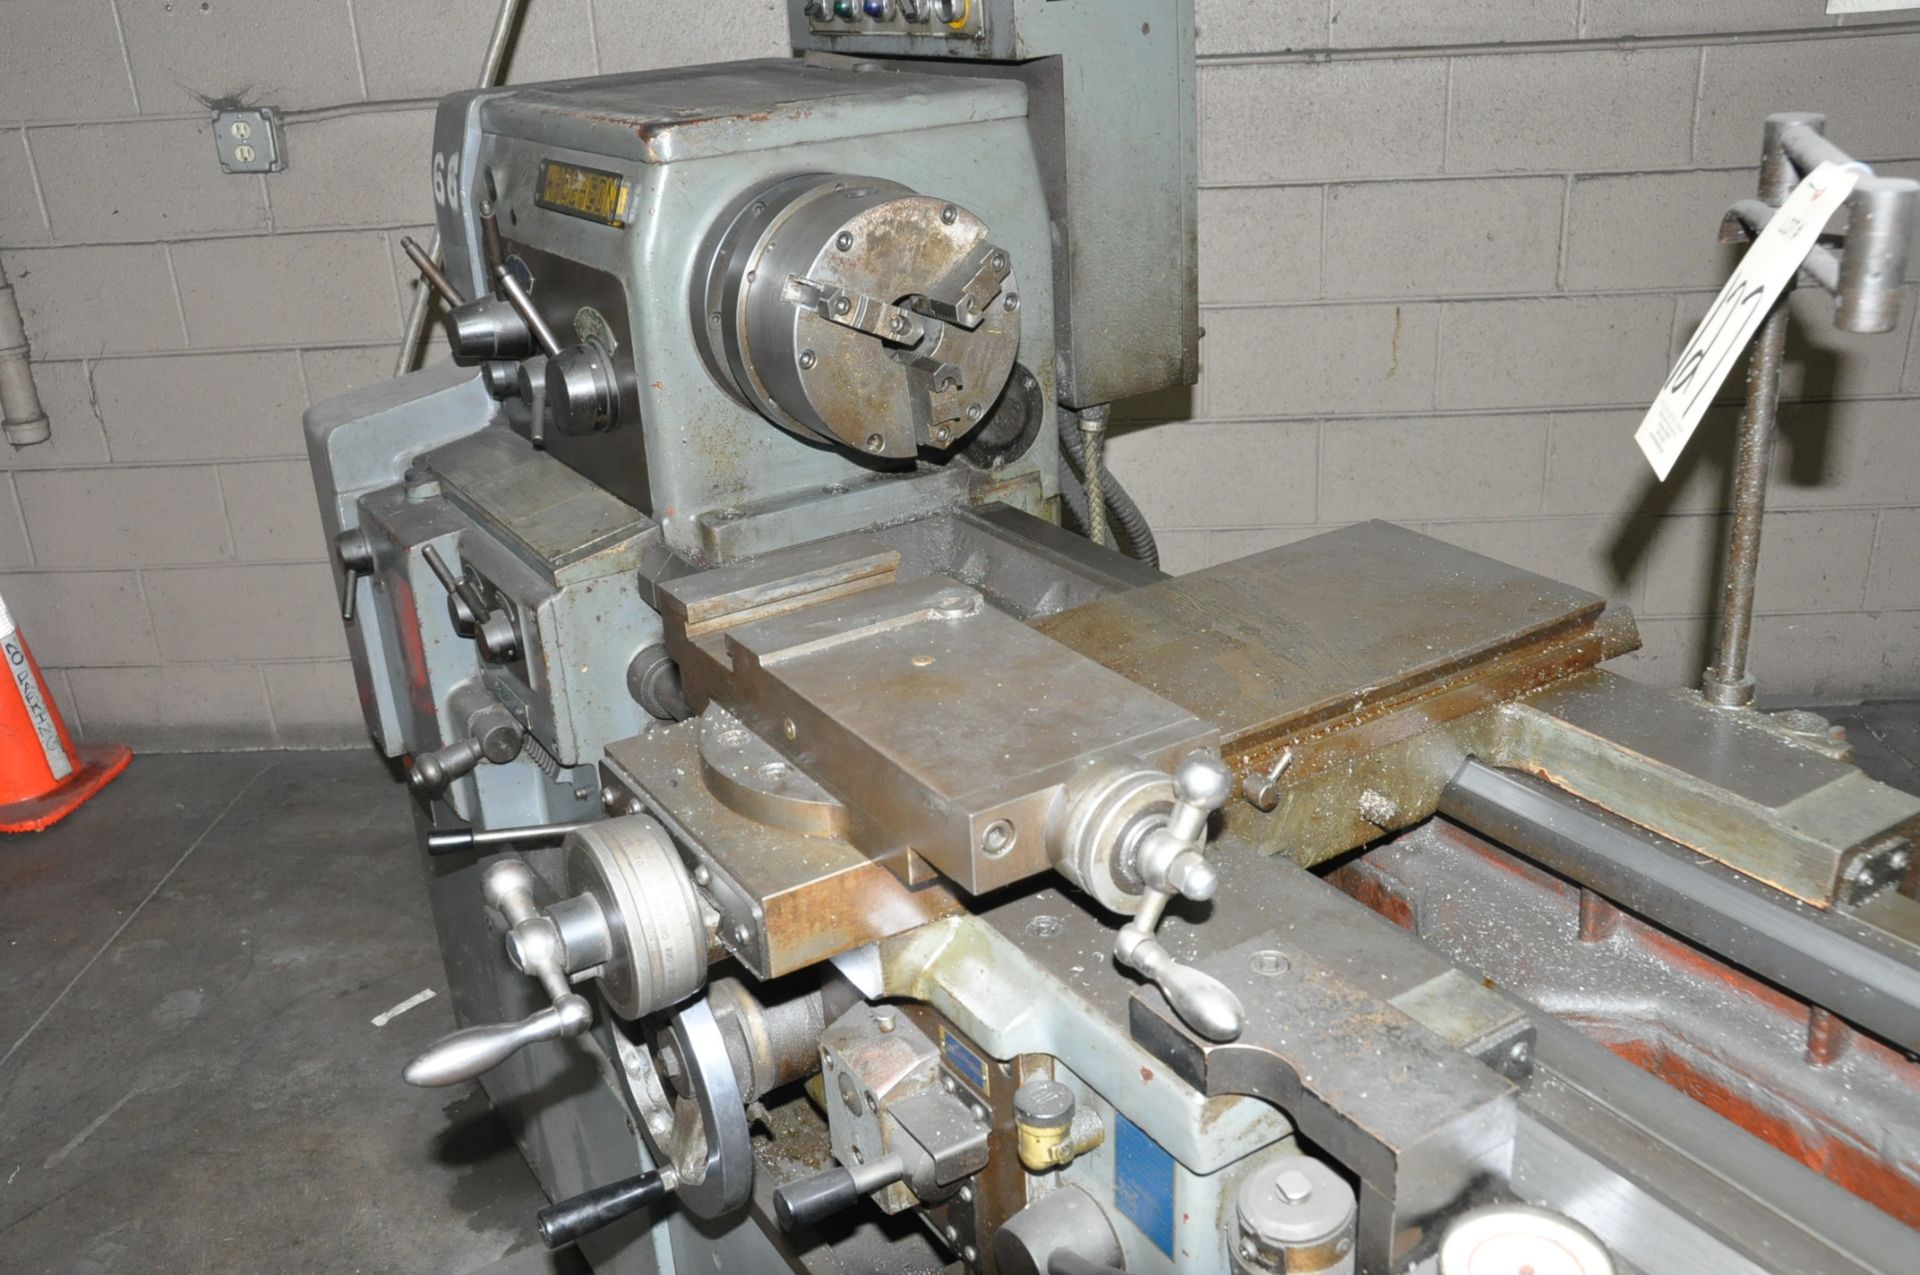 WHACHEON 17" x 59" CC QUICK CHANGE GEARED HEAD LATHE, S/n 9-8512-09, 32 to 1800 RPM Spindle Speed - Image 2 of 5